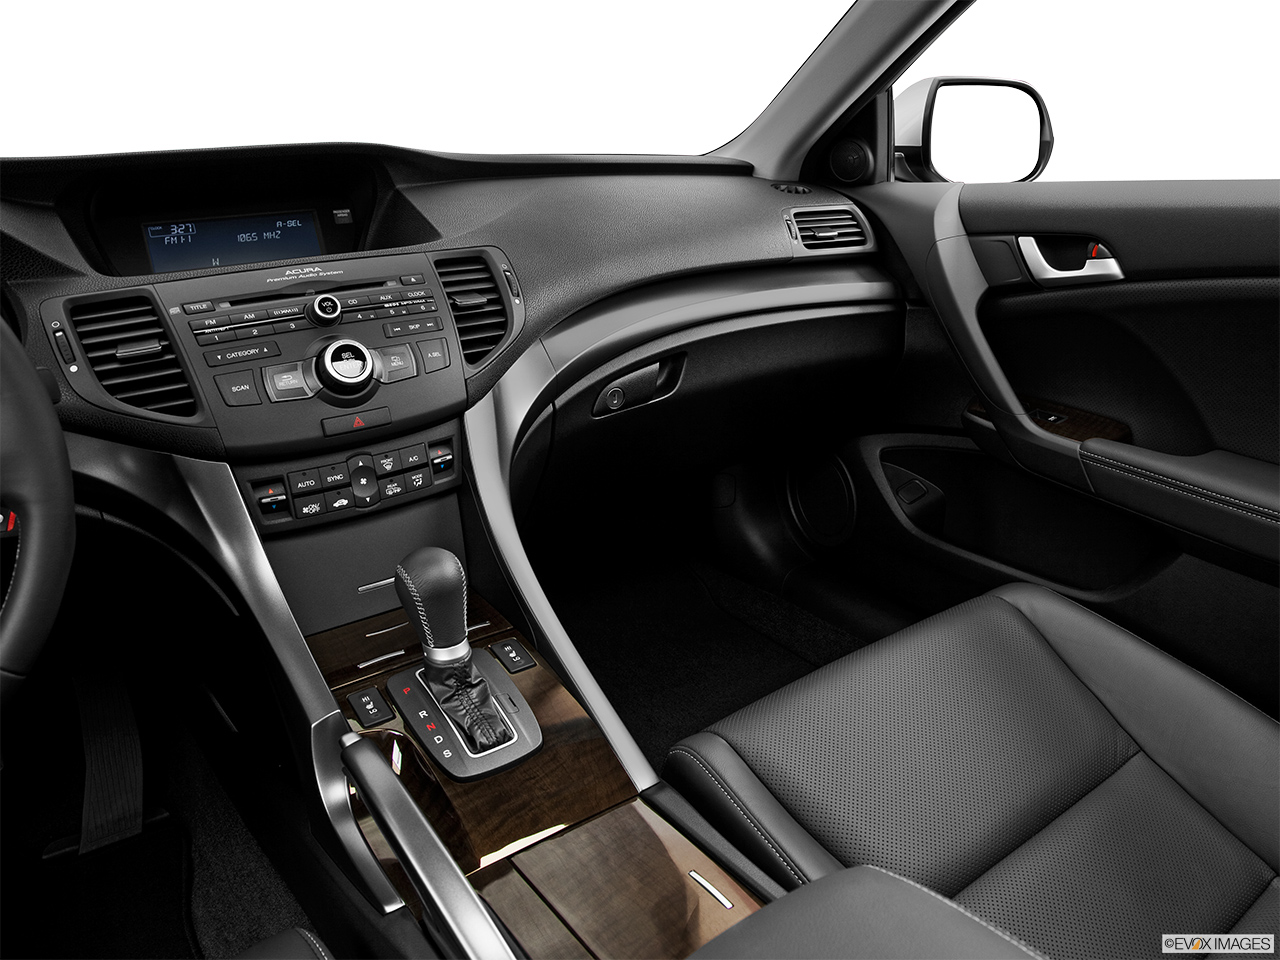 2013 Acura TSX 5-speed Automatic Center Console/Passenger Side. 